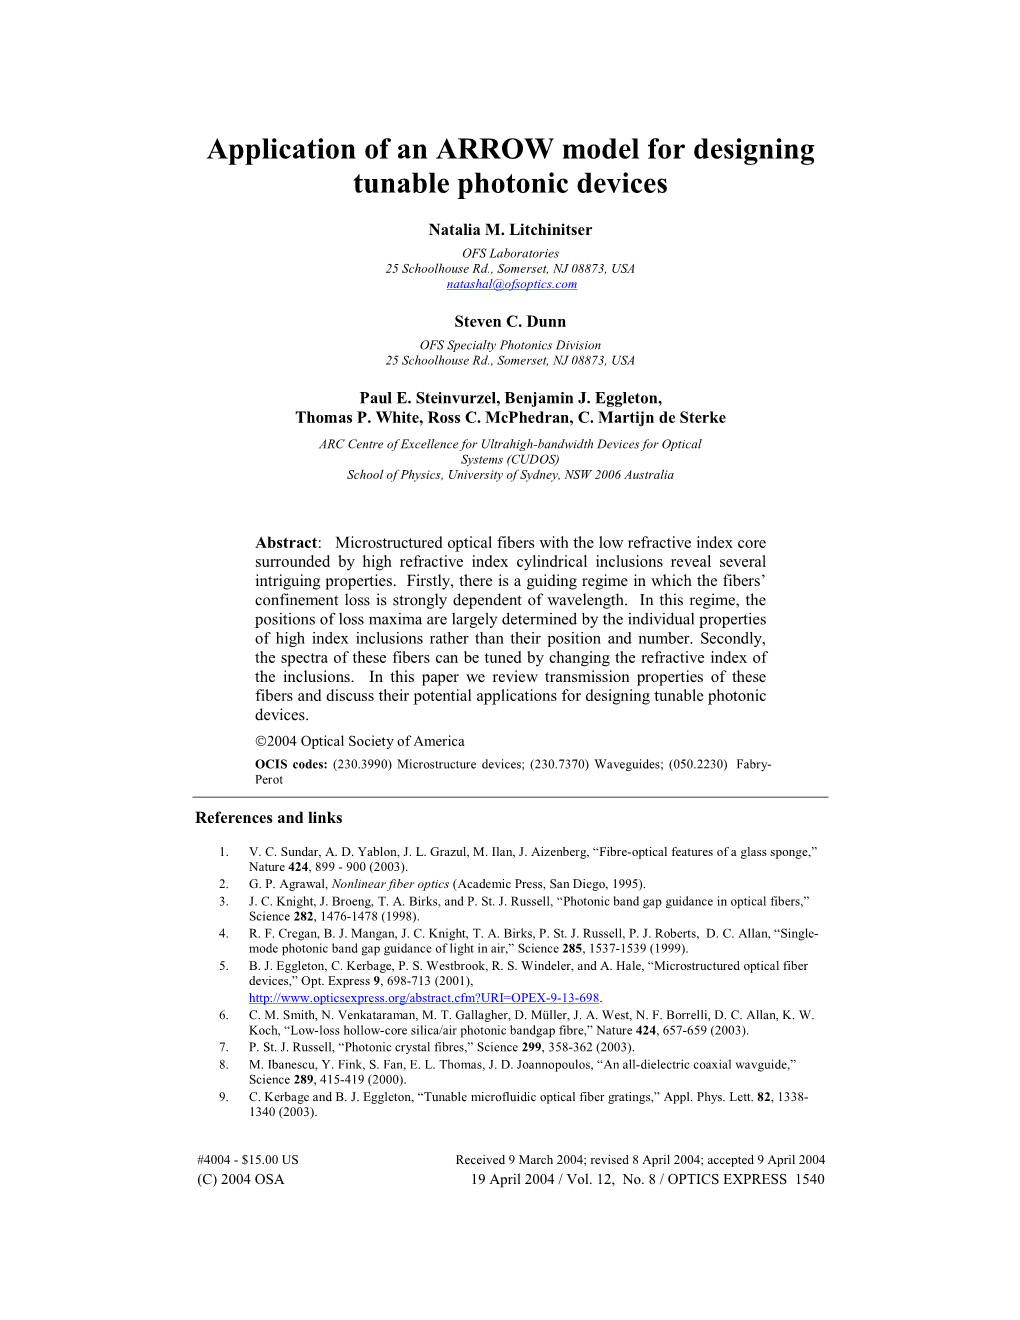 Application of an ARROW Model for Designing Tunable Photonic Devices